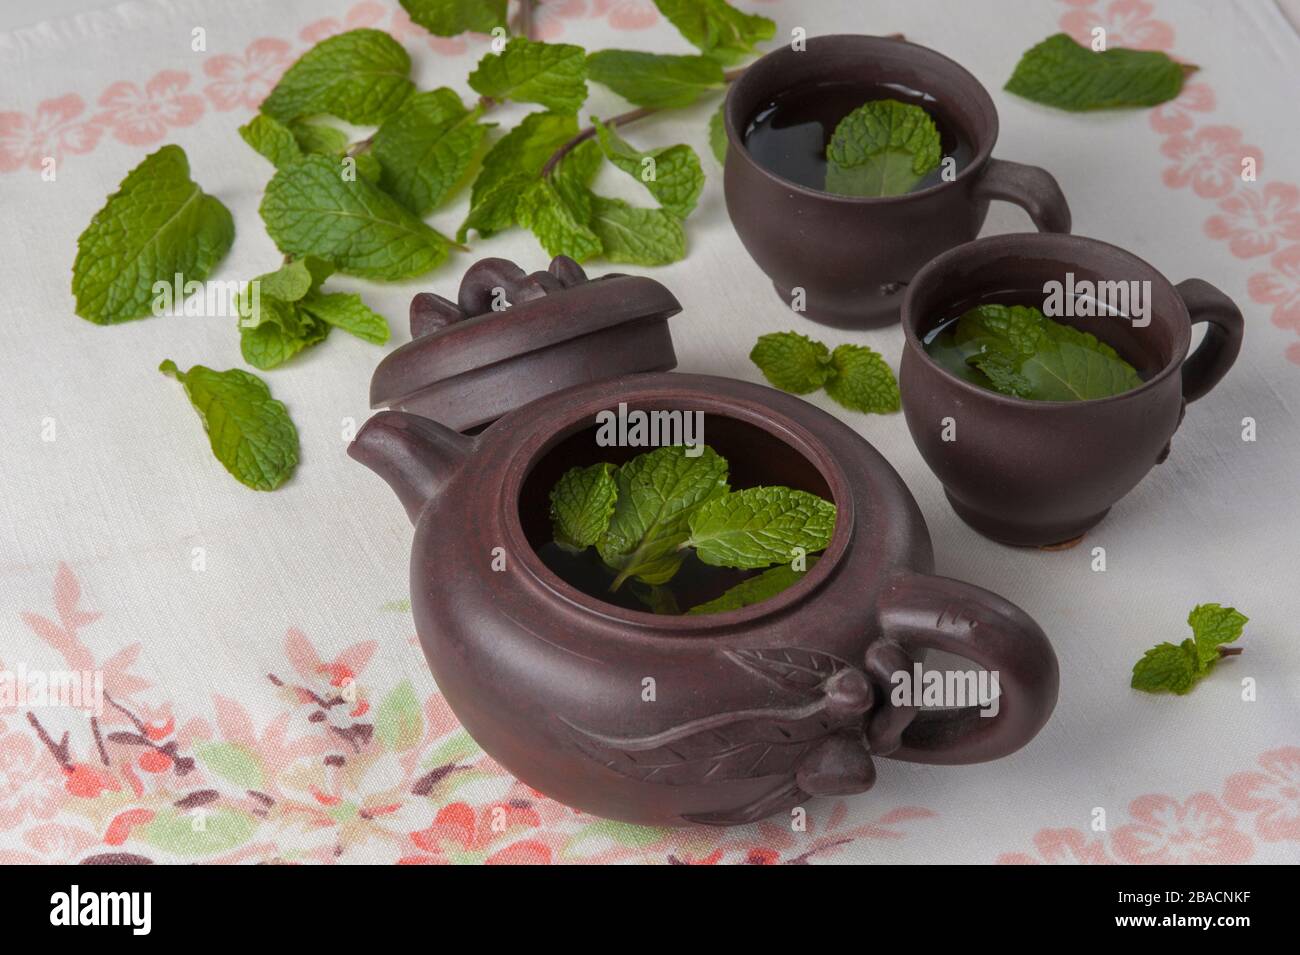 Yixing clay teapot and two tea cups with mint leaves Stock Photo